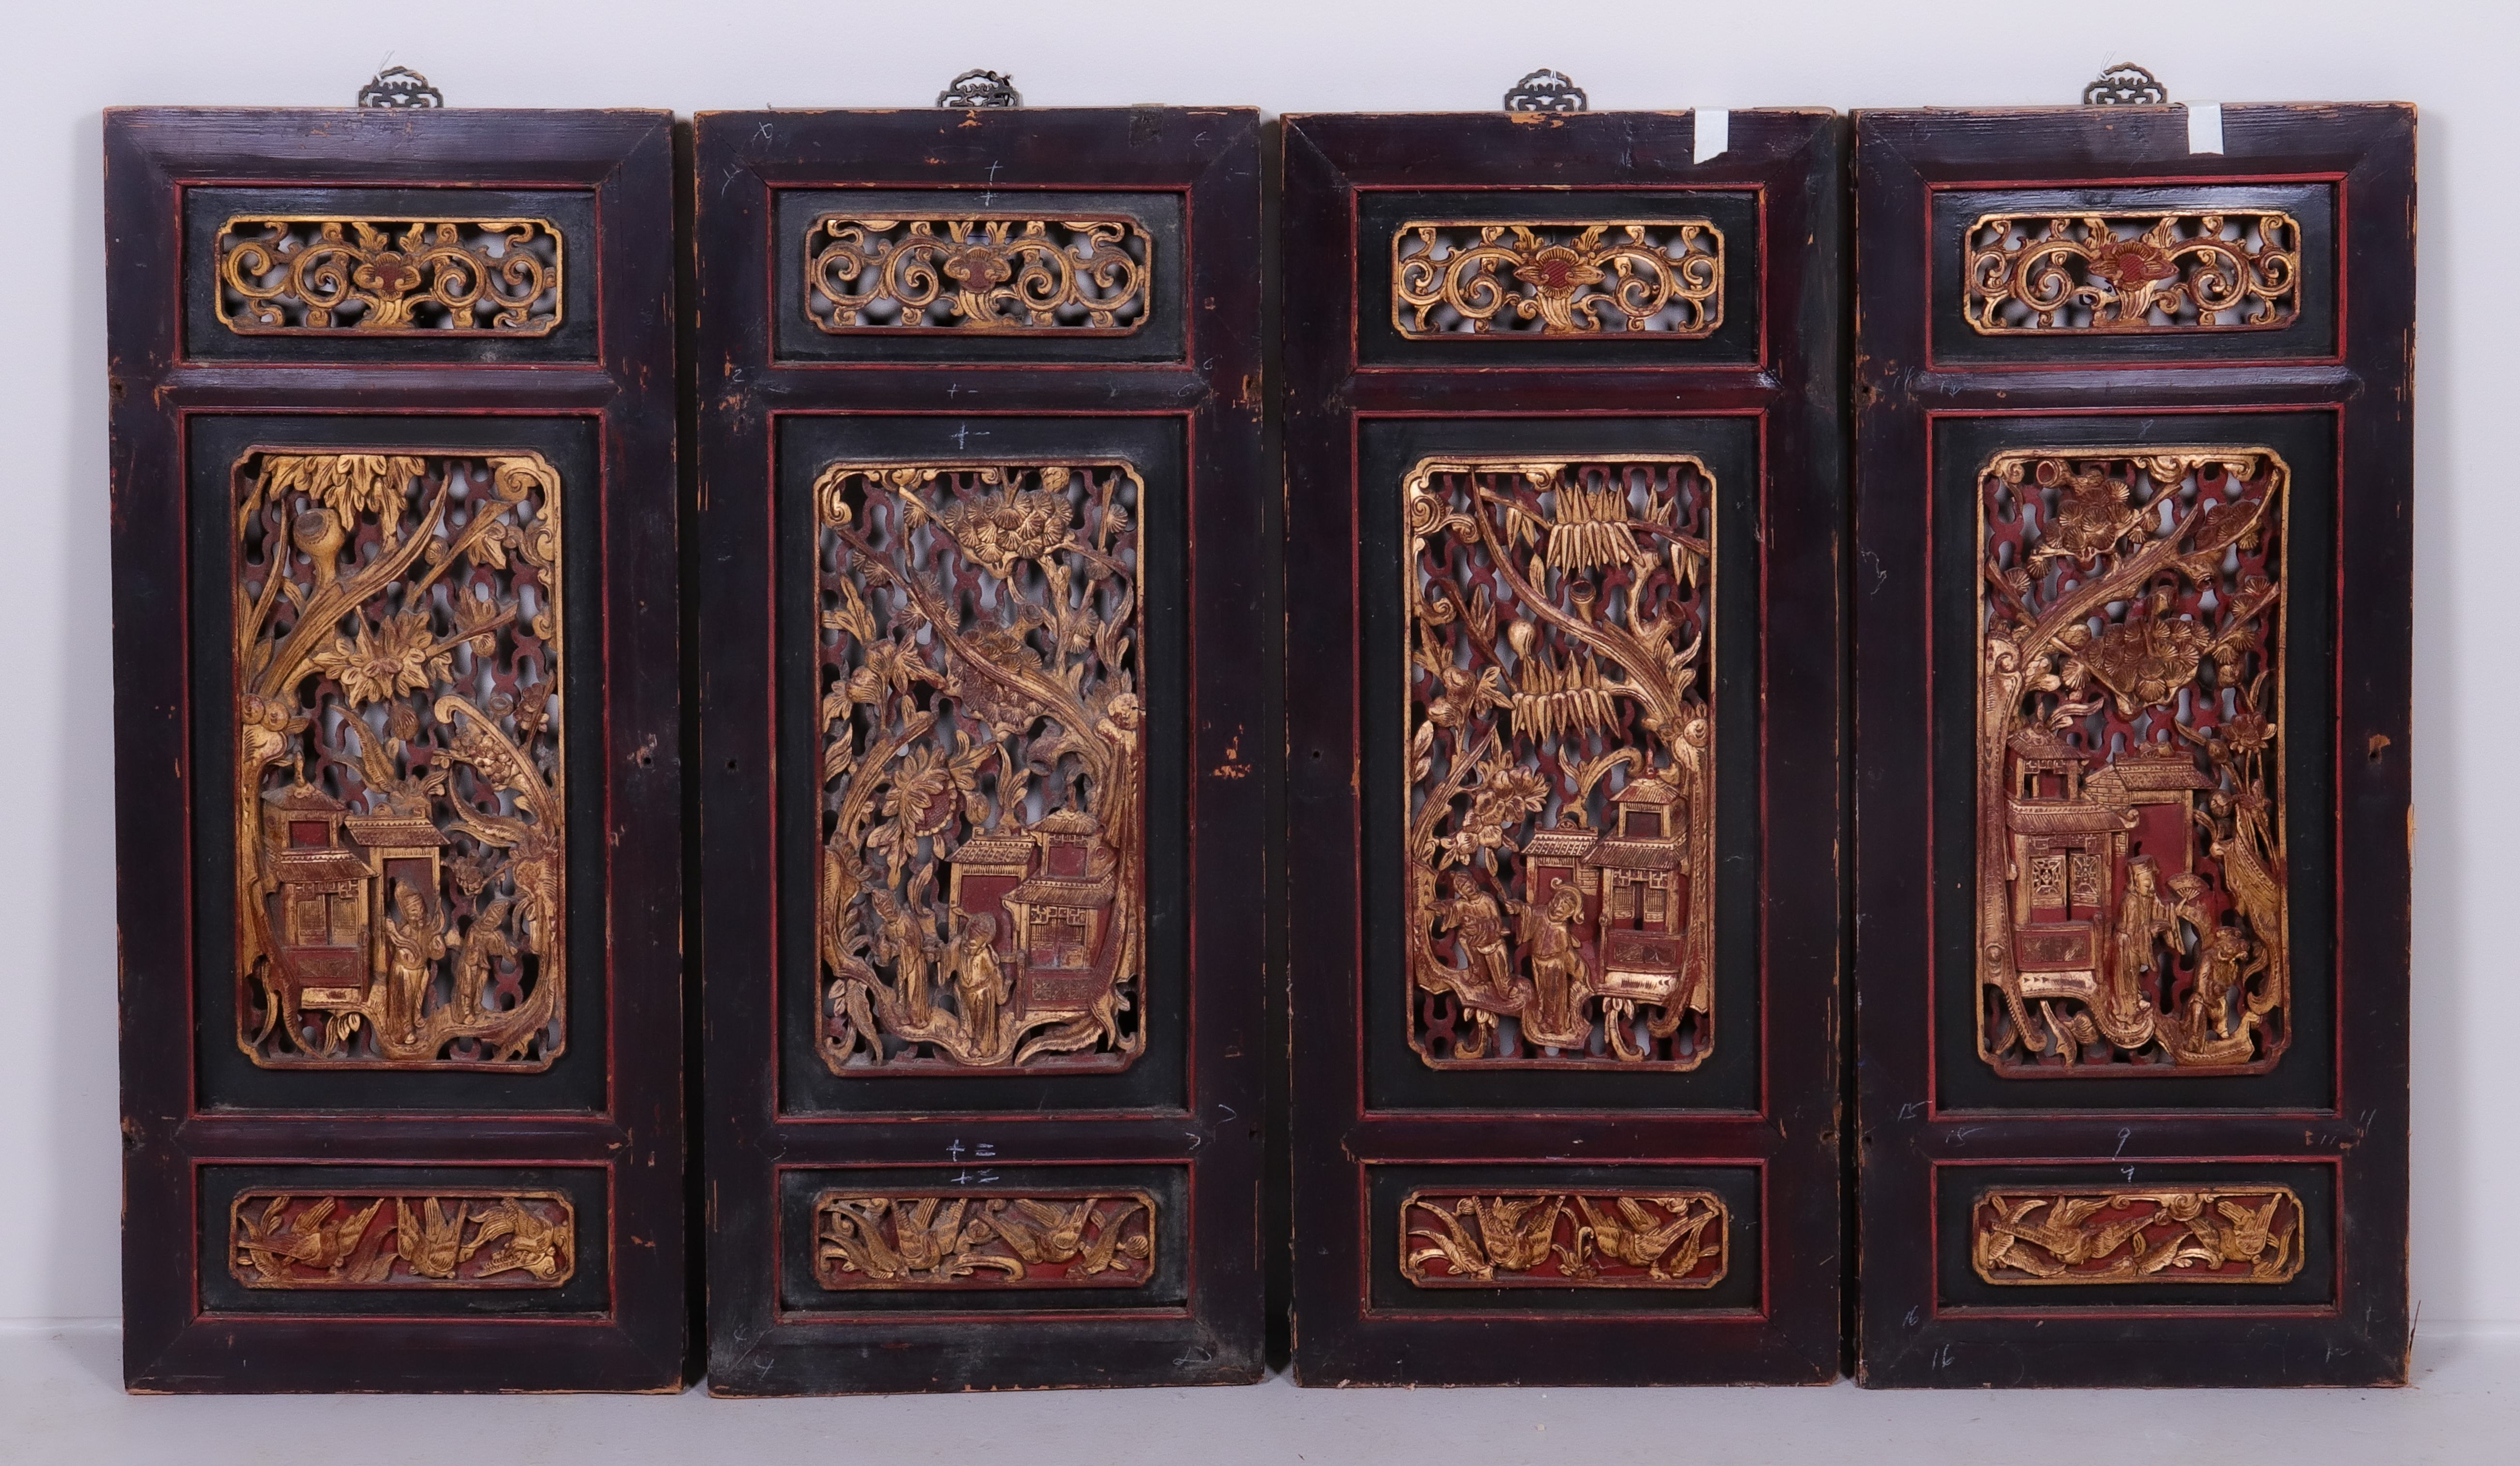  4 Chinese carved wood panels  27a653